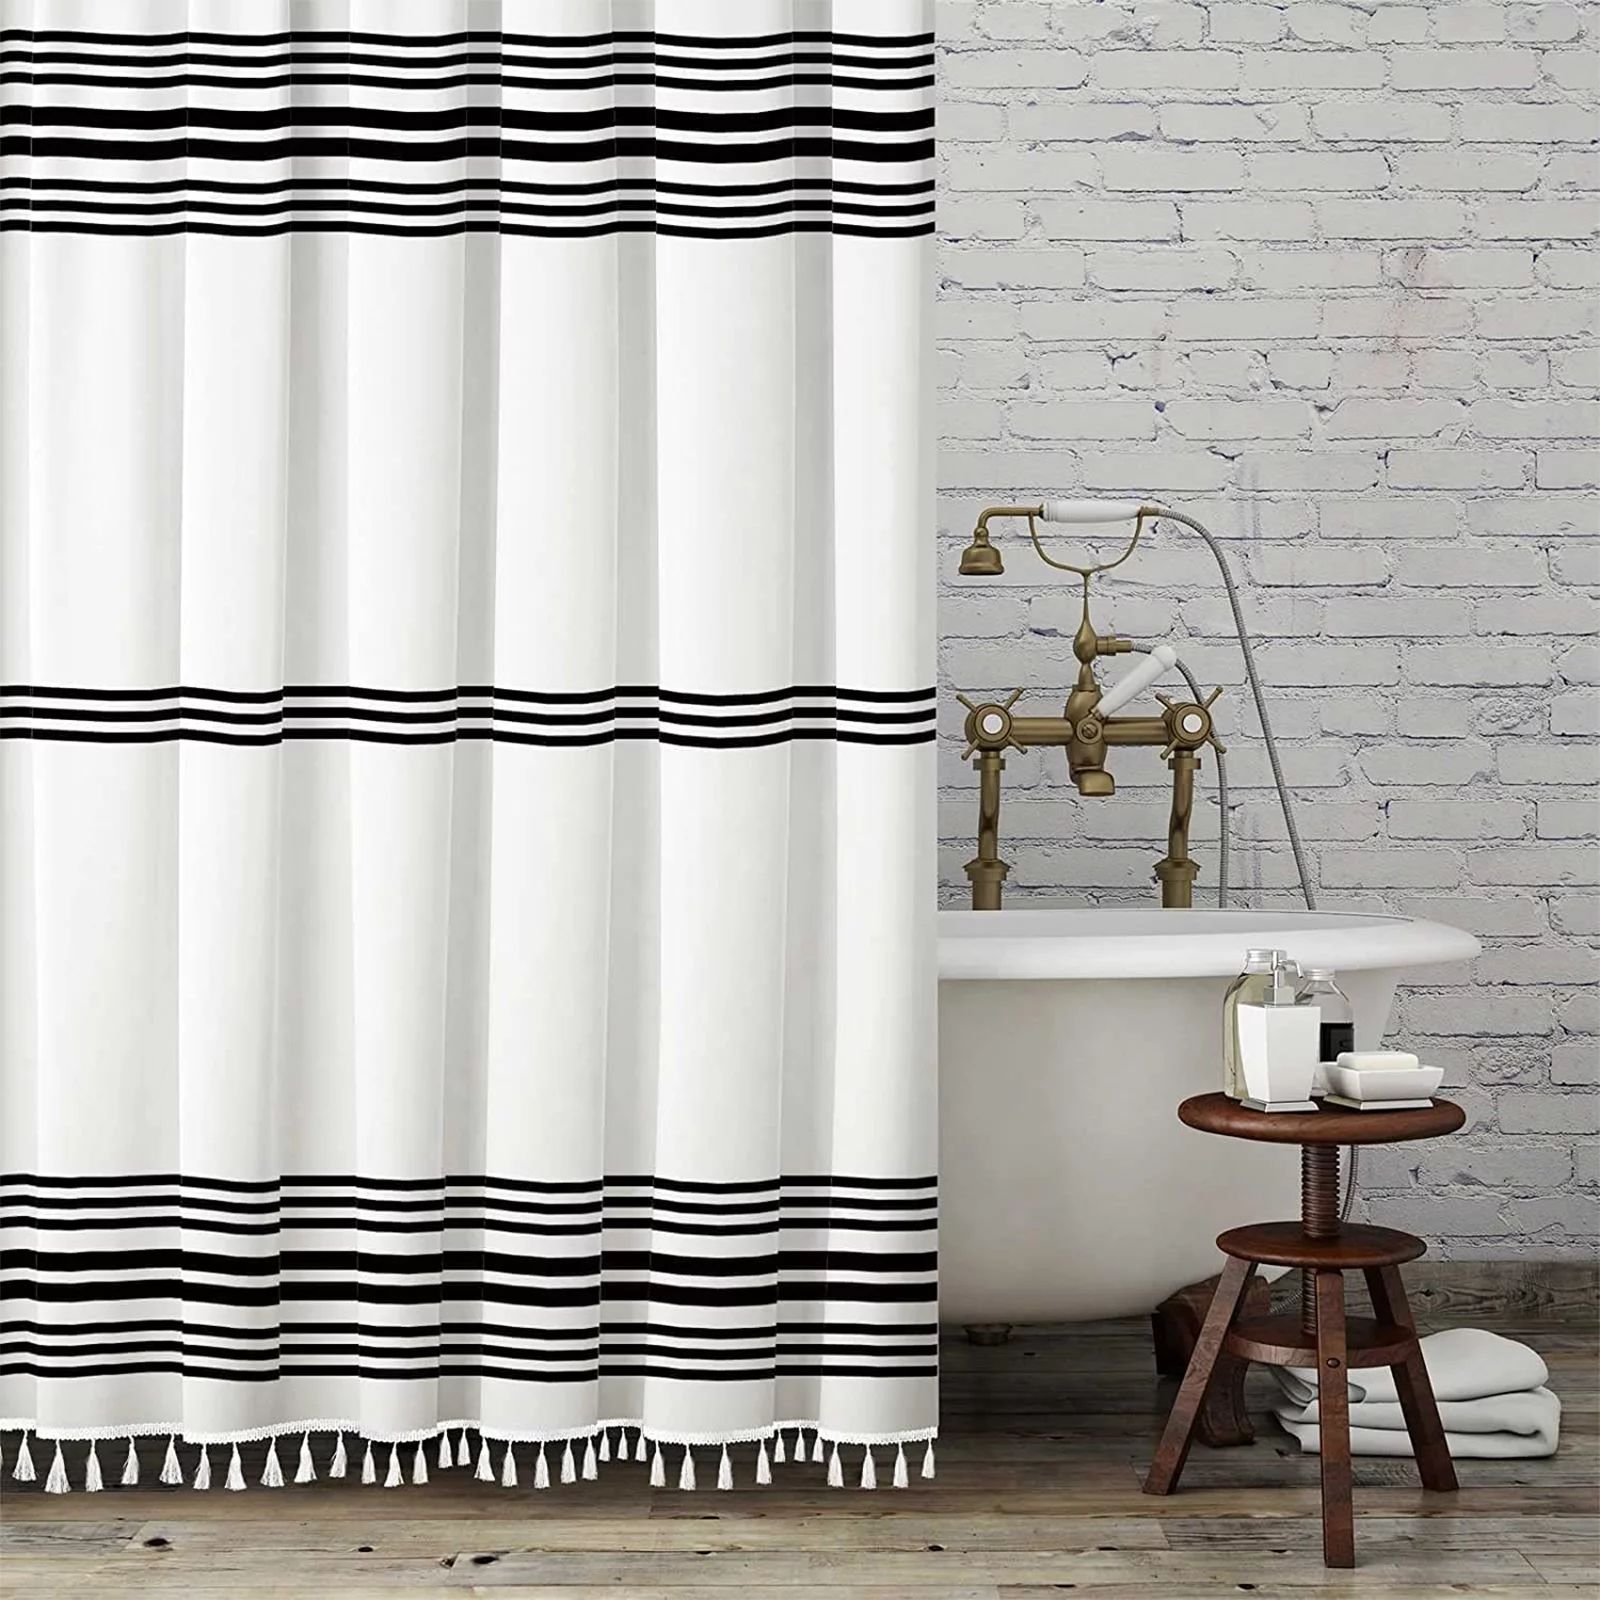 Shower Curtain Striped with Tassel Modern Bathroom Curtains, Fabric Black and White, Waterproof 7... | Walmart (US)